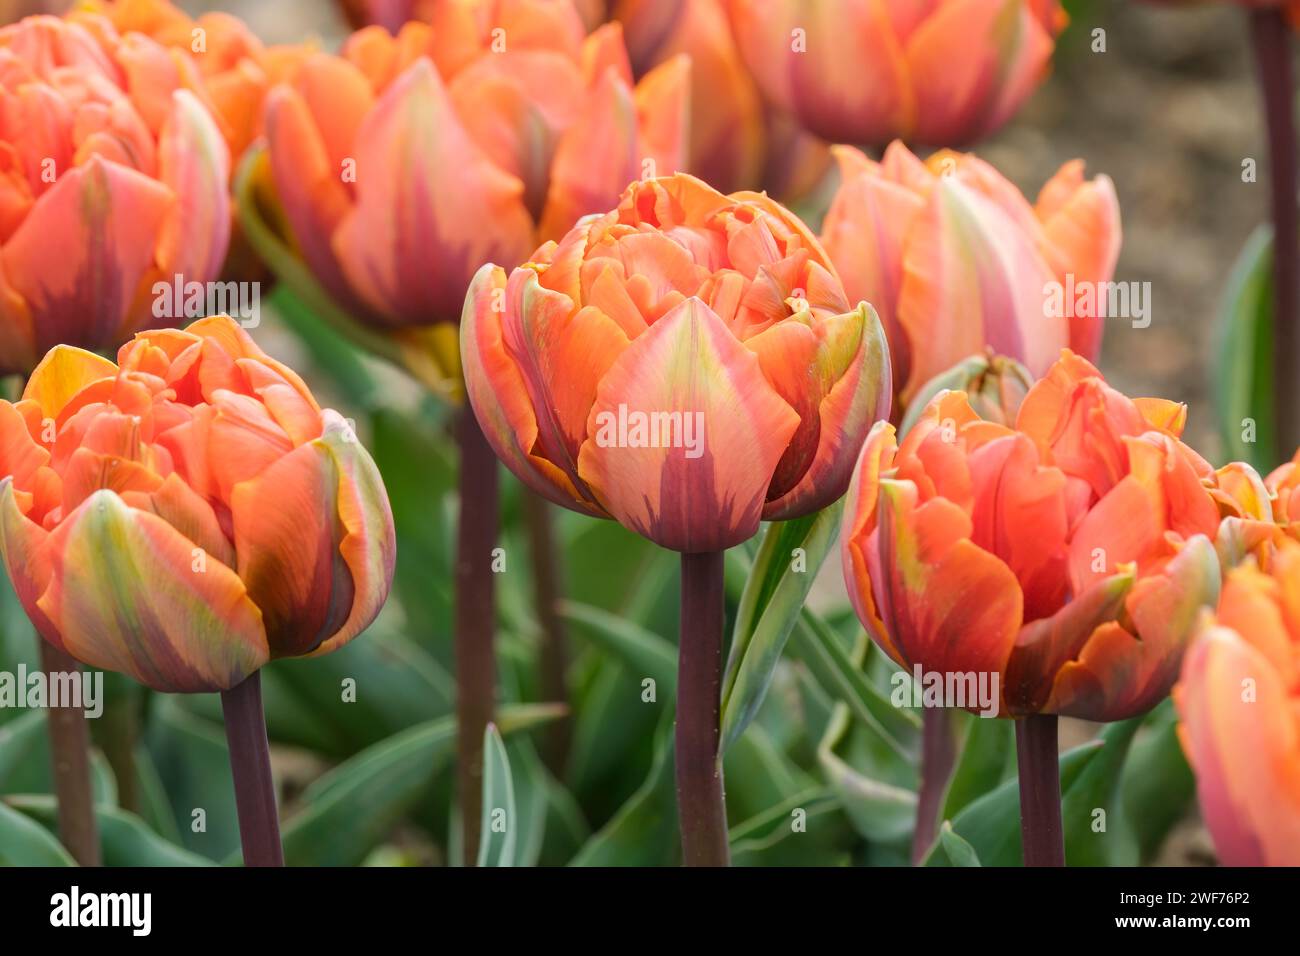 Tulip Orange Princess orange double flowers with yellow shading on the inner petals,red and green on  outer petals. Stock Photo